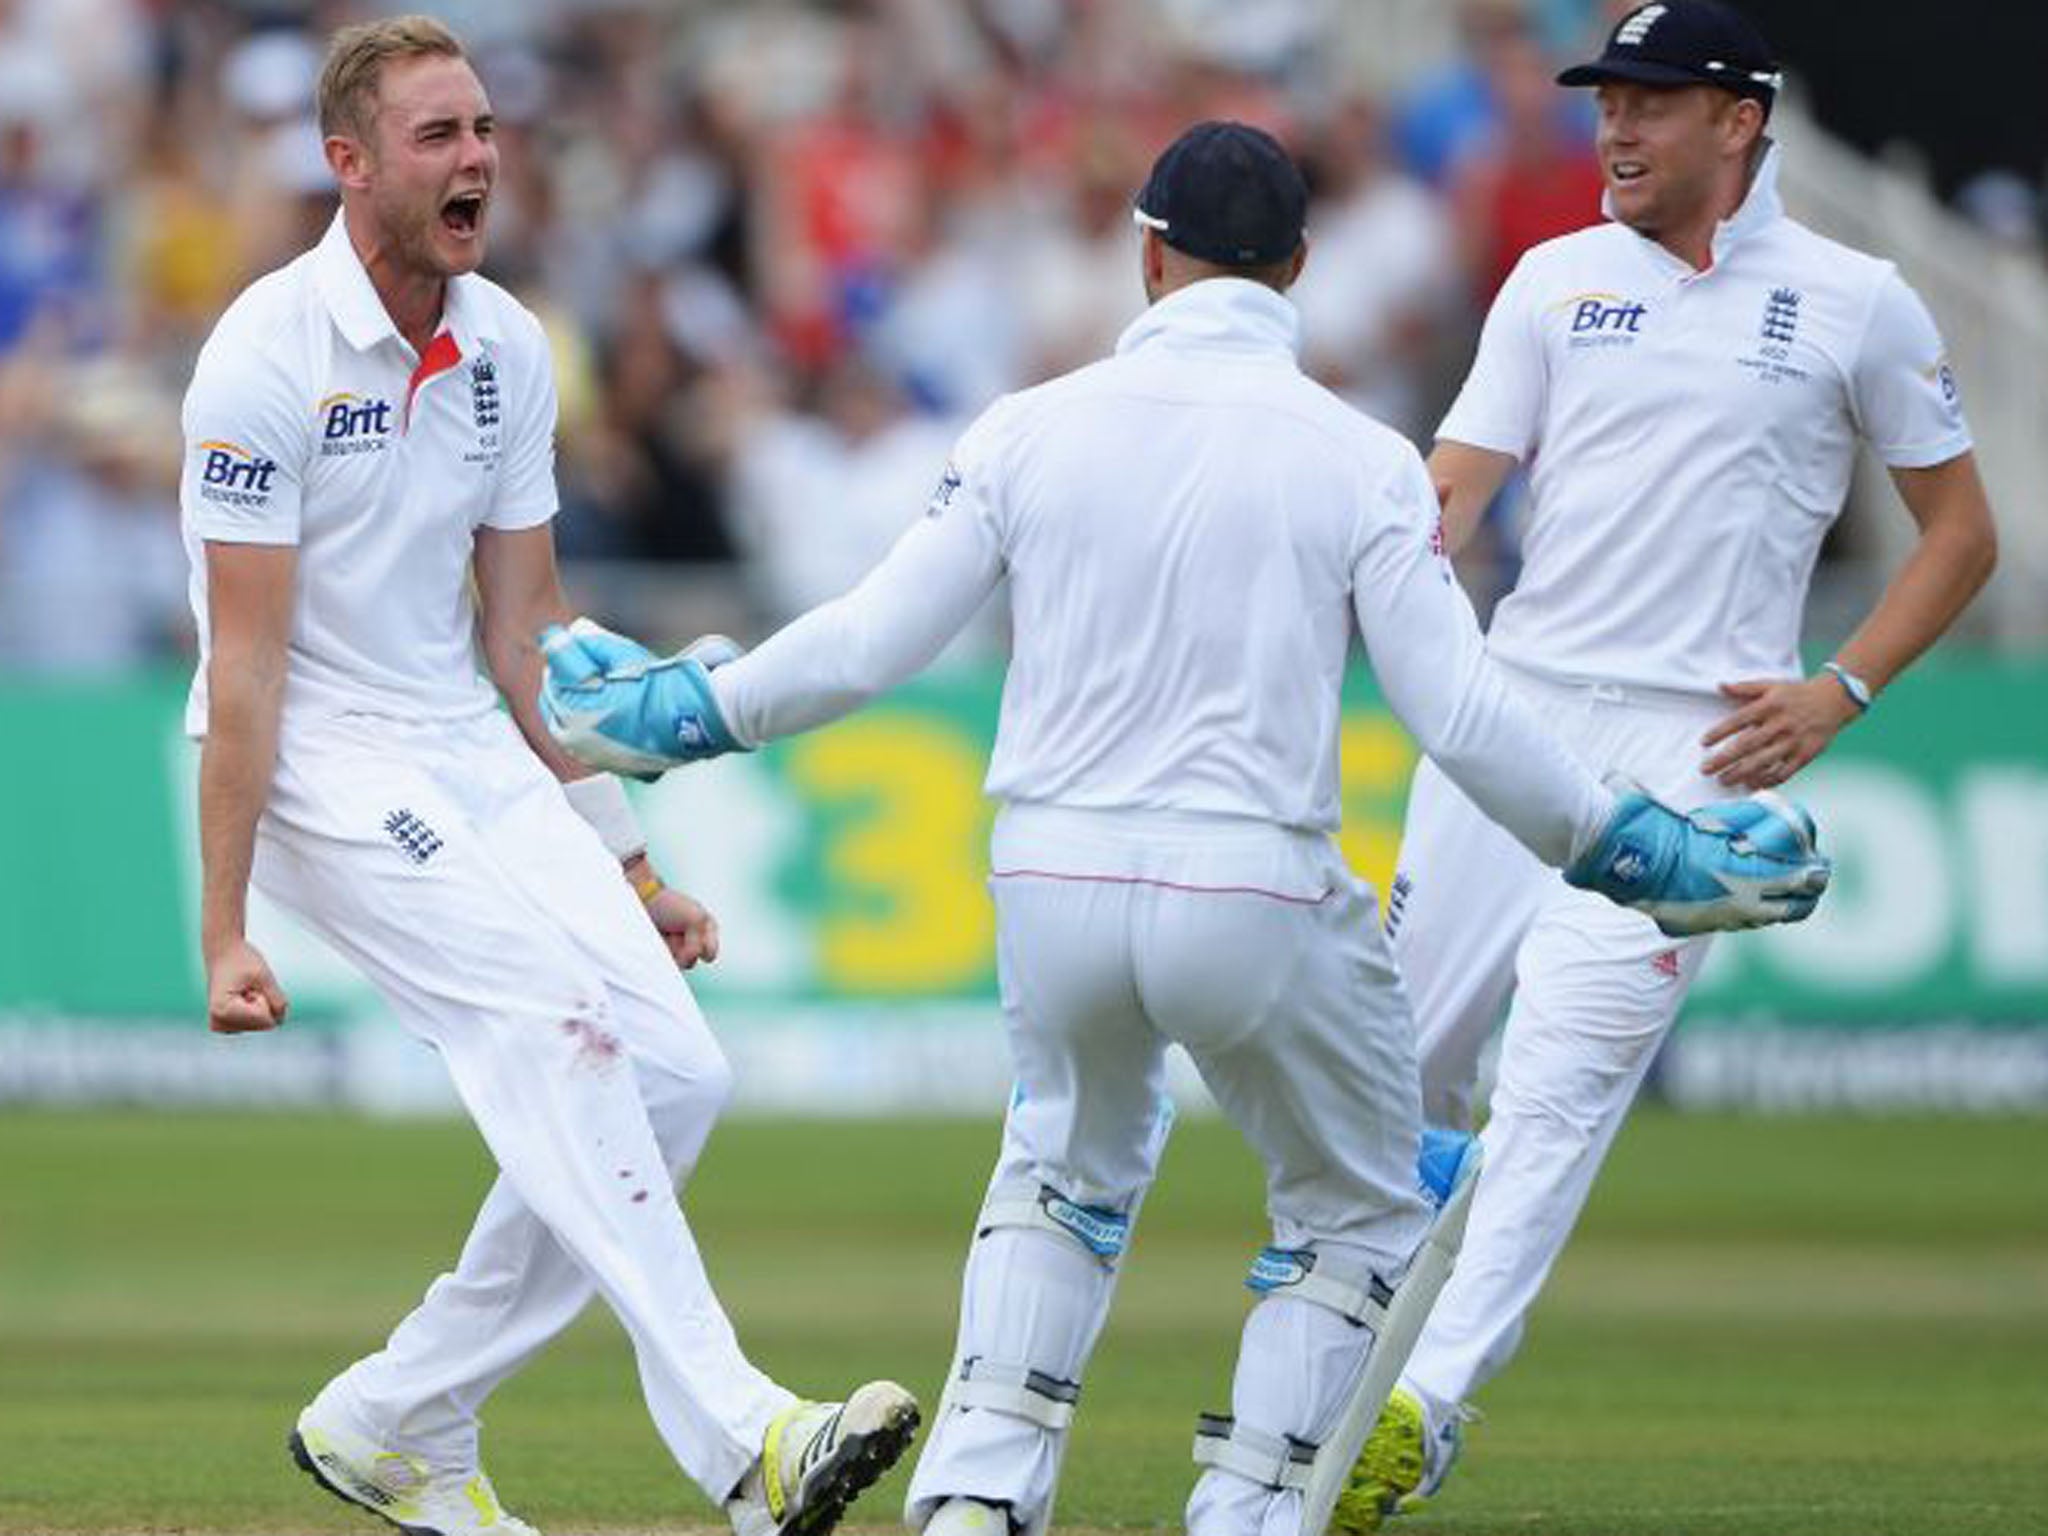 Stuart Broad celebrates the wicket of Australia's Shane Watson to get England on the board after an opening stand of 84 (Gareth Copley/Getty Images)